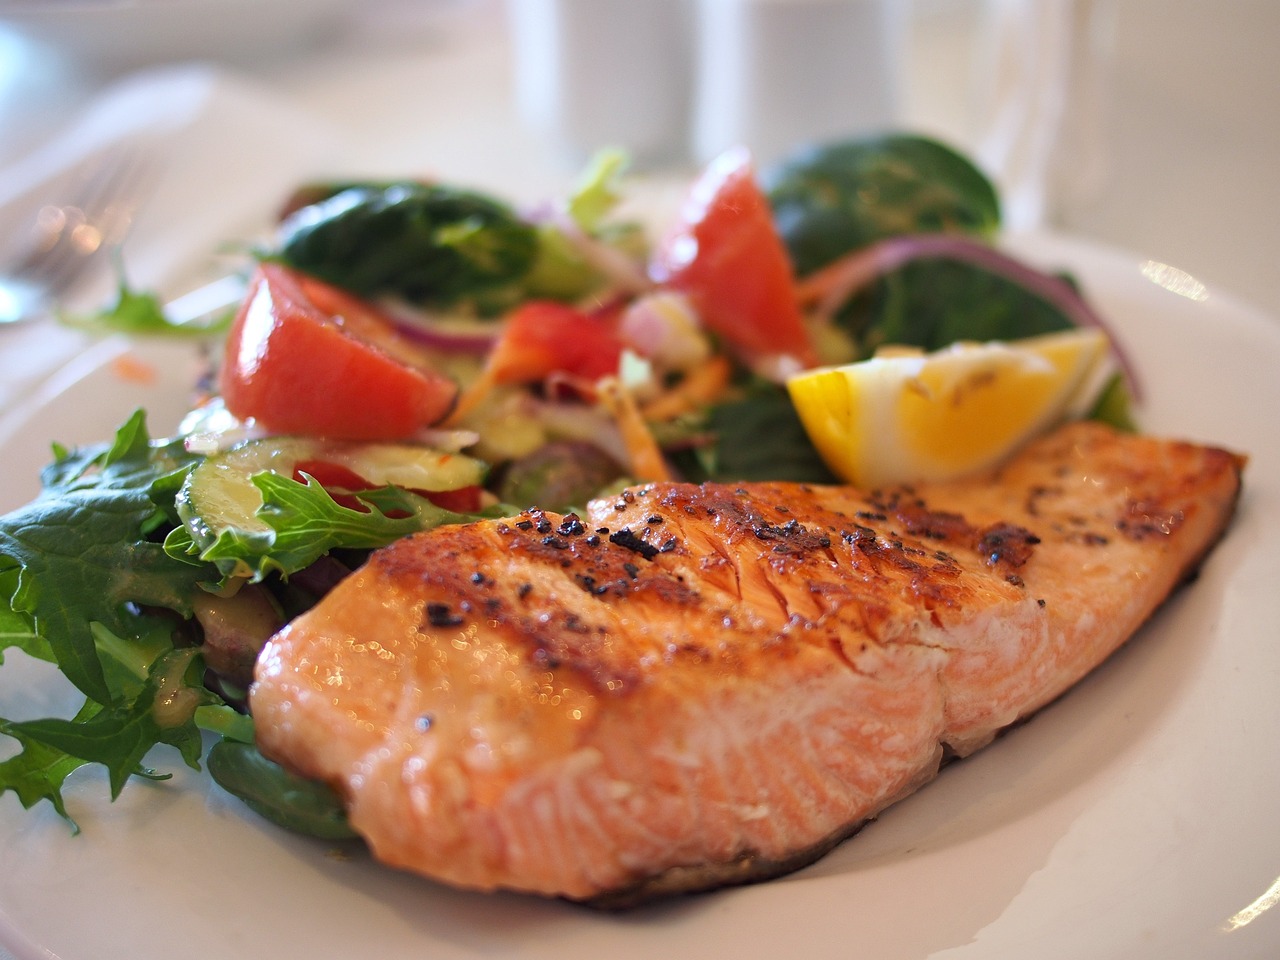 Salmon served with vegetables